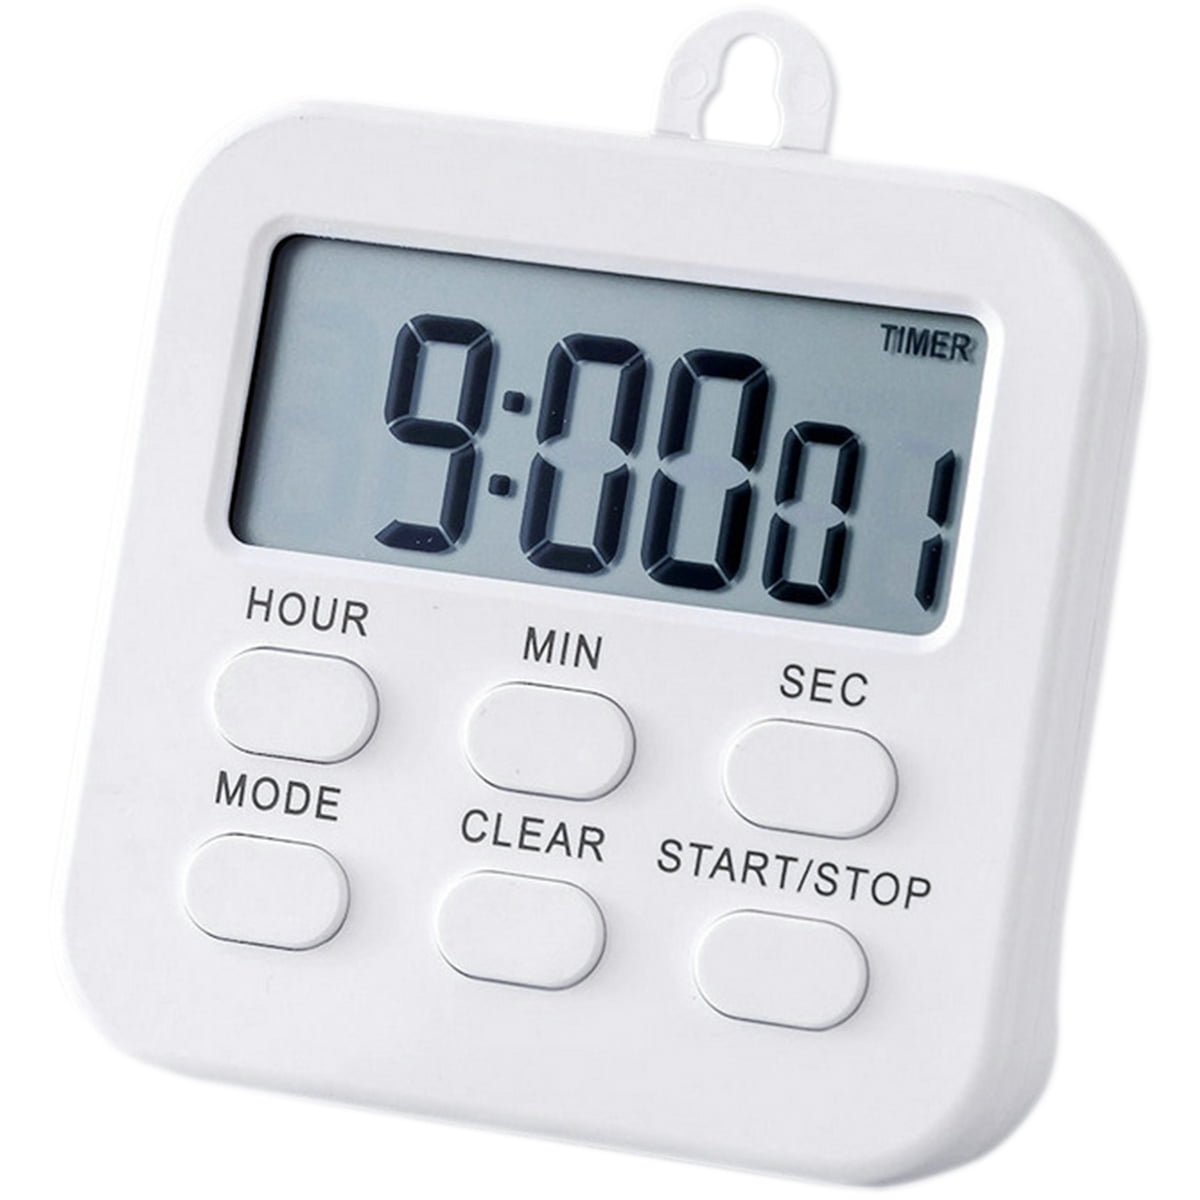 Gourmet Club 100 Minute Magnetic Large Display Digital Kitchen Timer M18e for sale online 